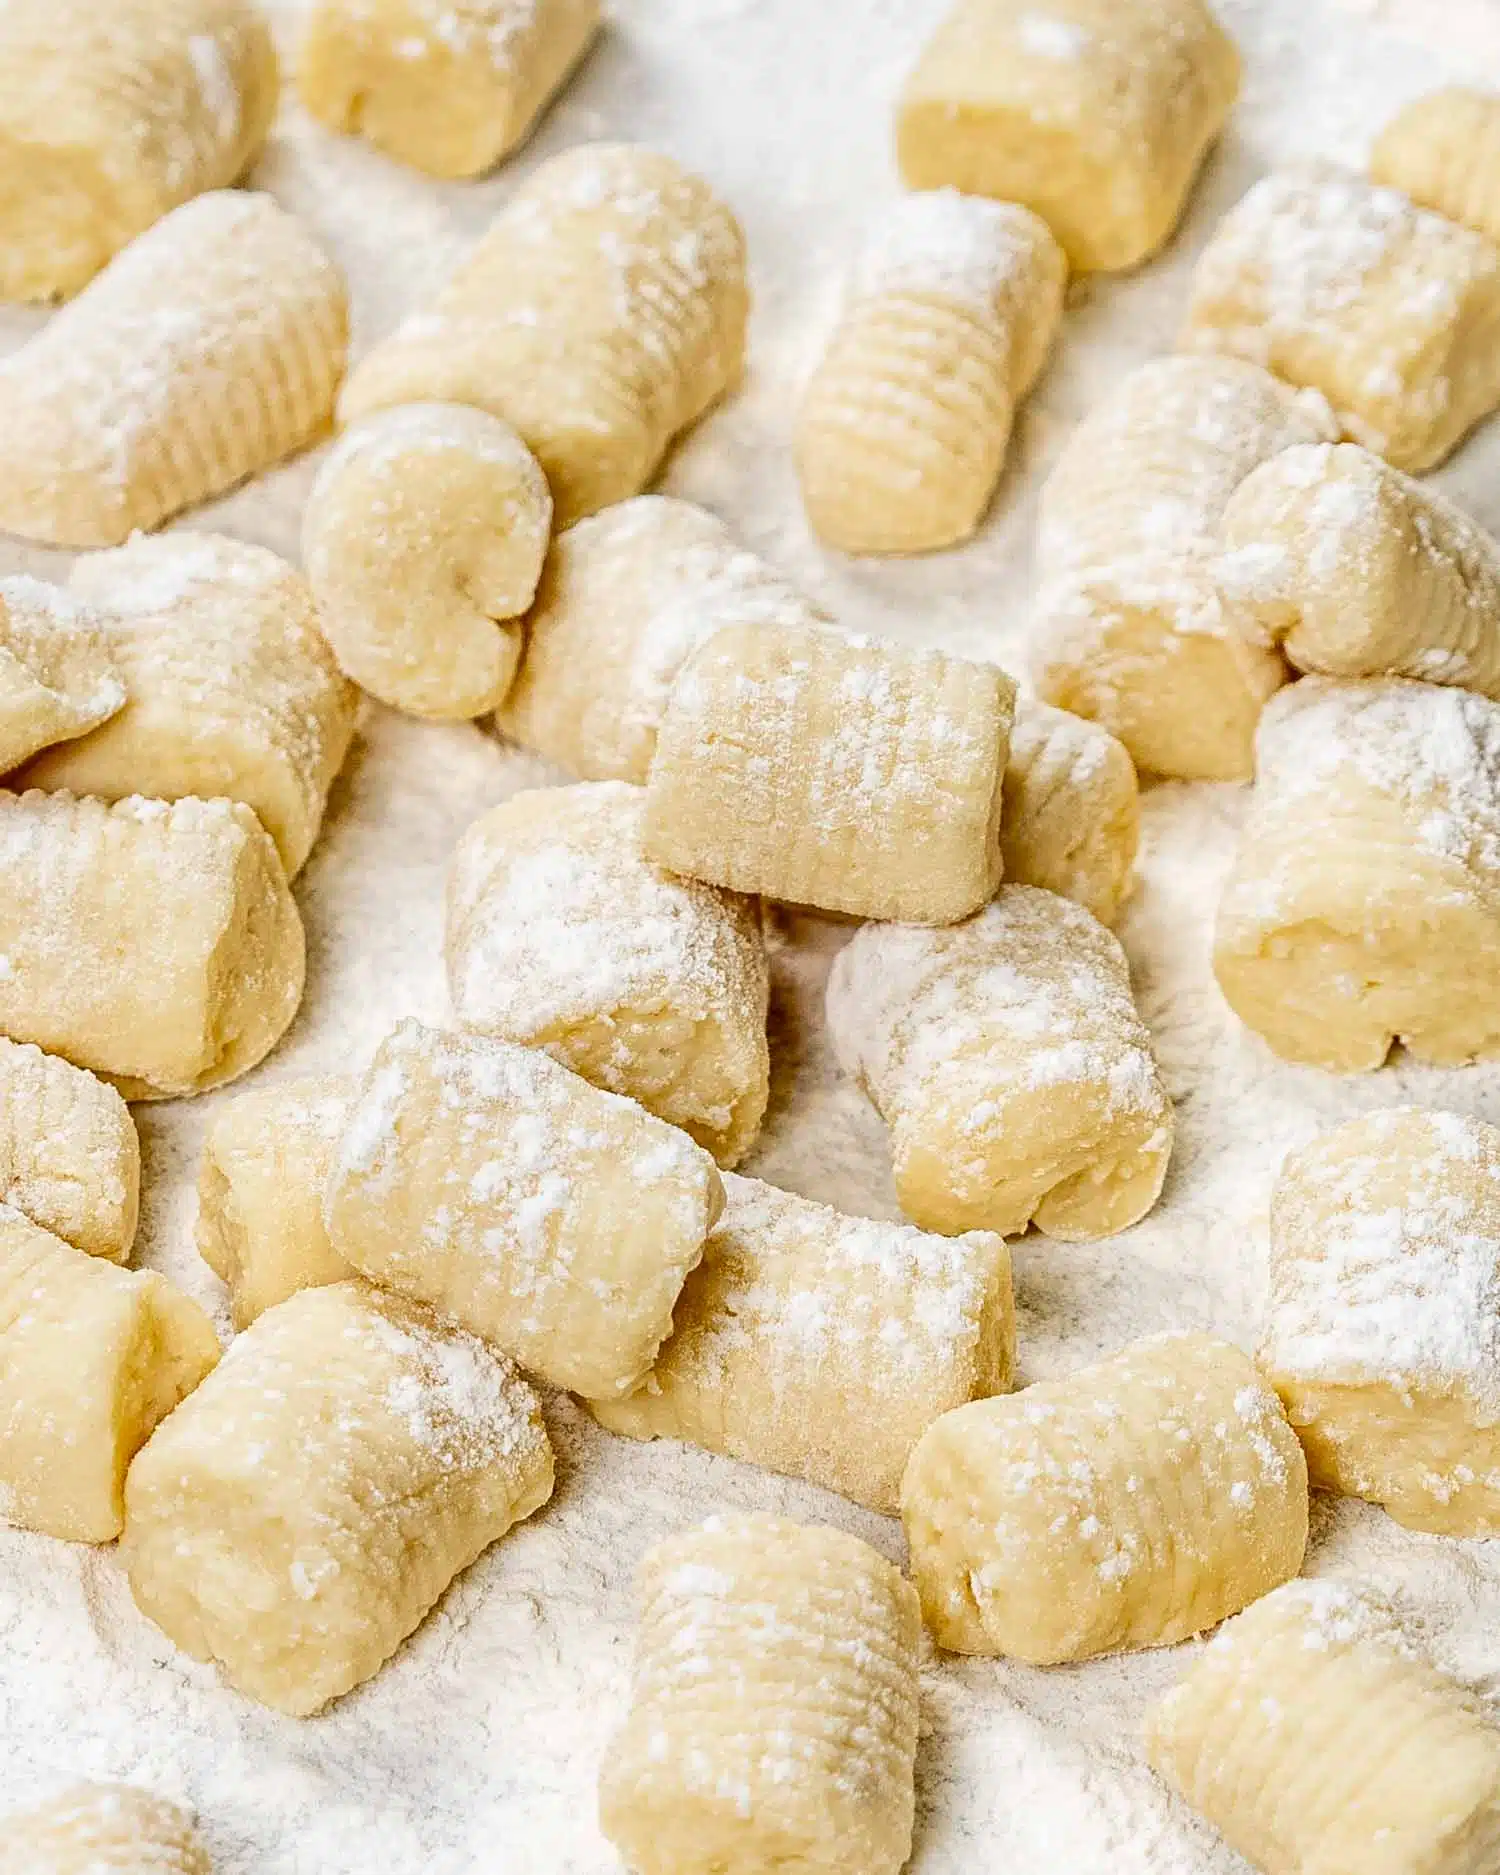 freshly made gnocchi coated with flour on a counter.